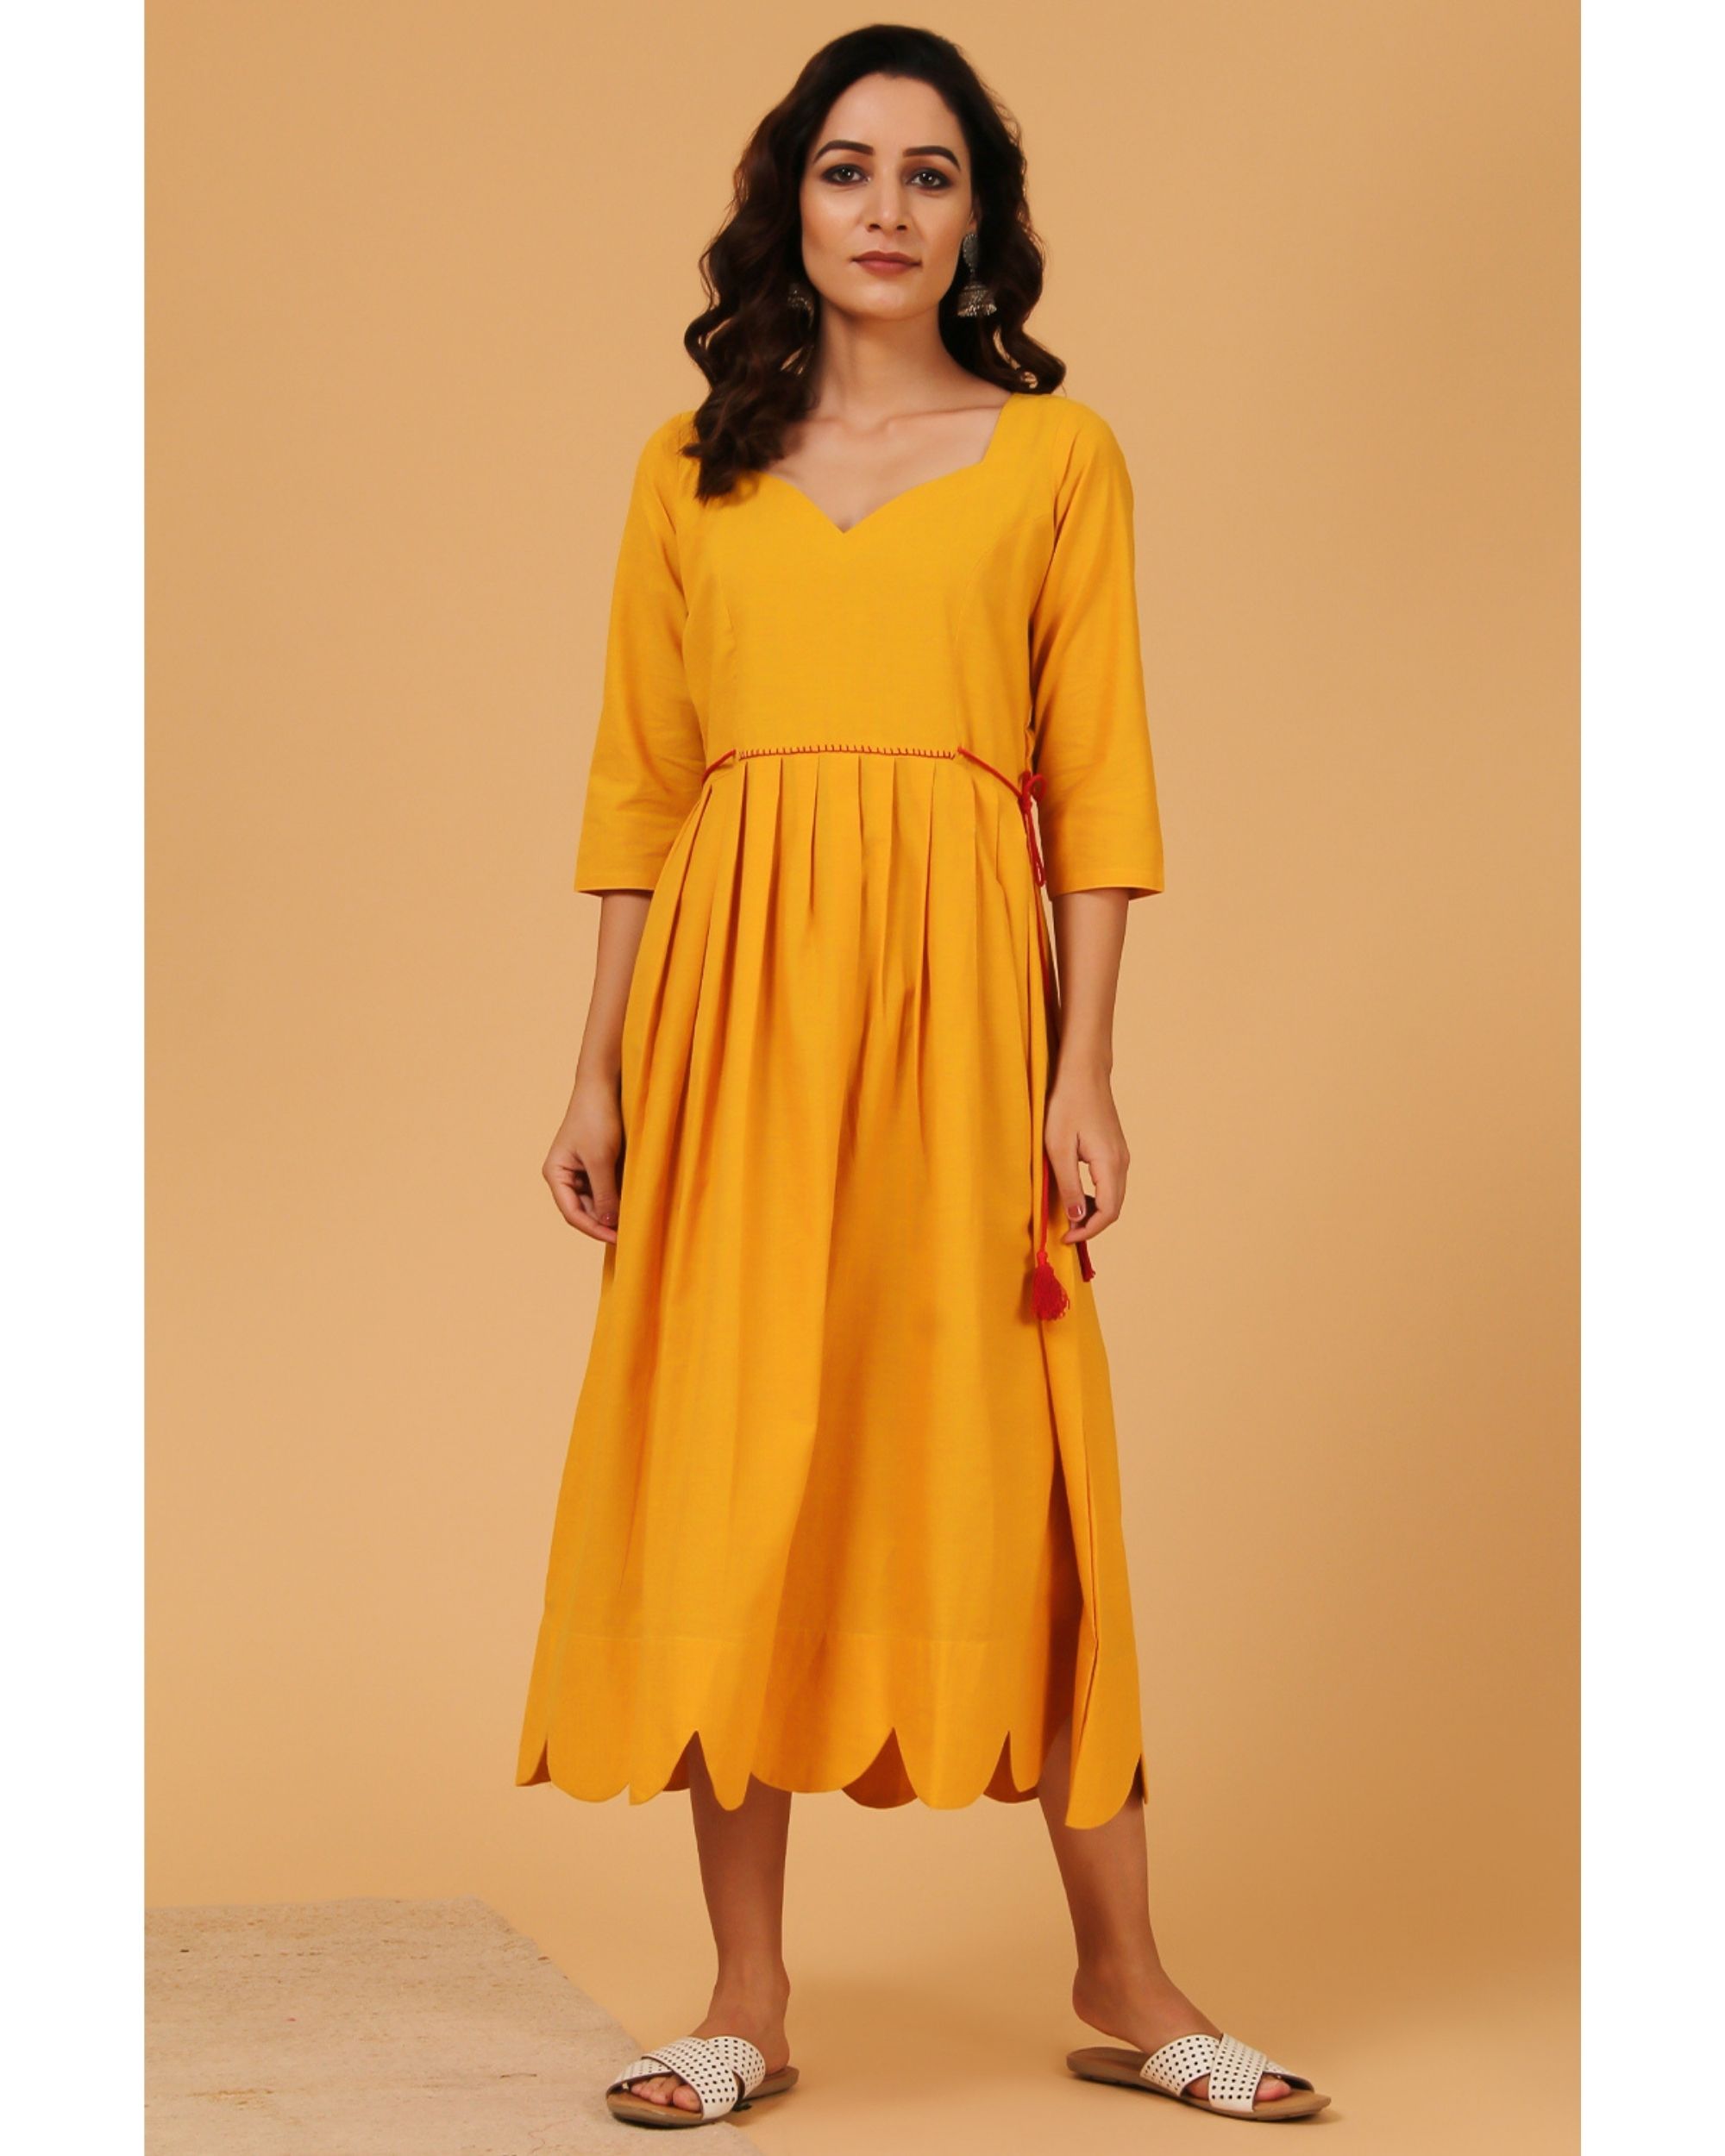 Mustard yellow pleated scalloped dress by The Cotton Staple | The ...